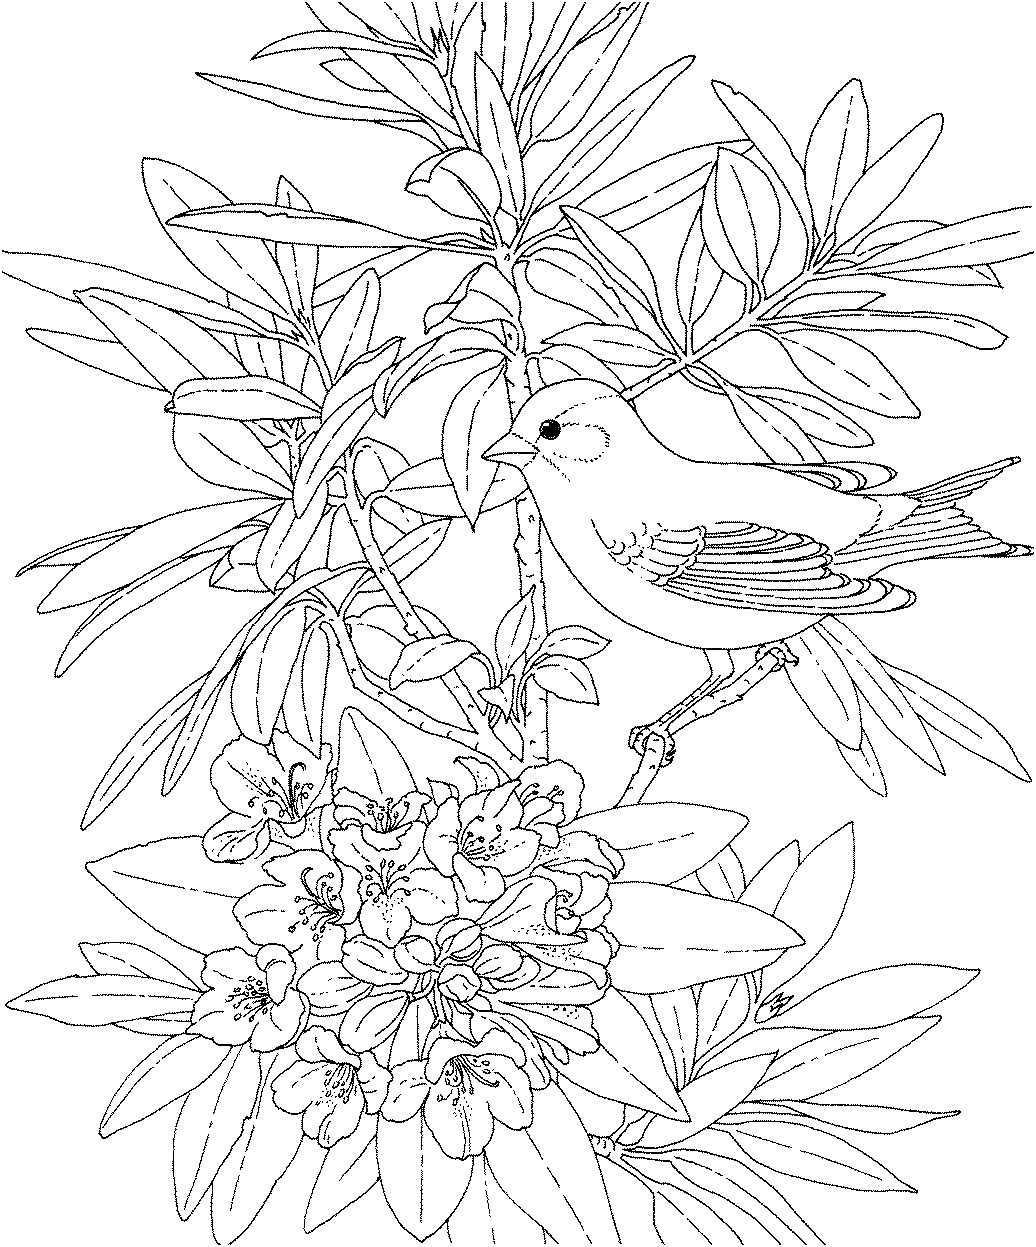 Flowers Coloring Pages For Adults
 His Heart of passion Little Winter Birds